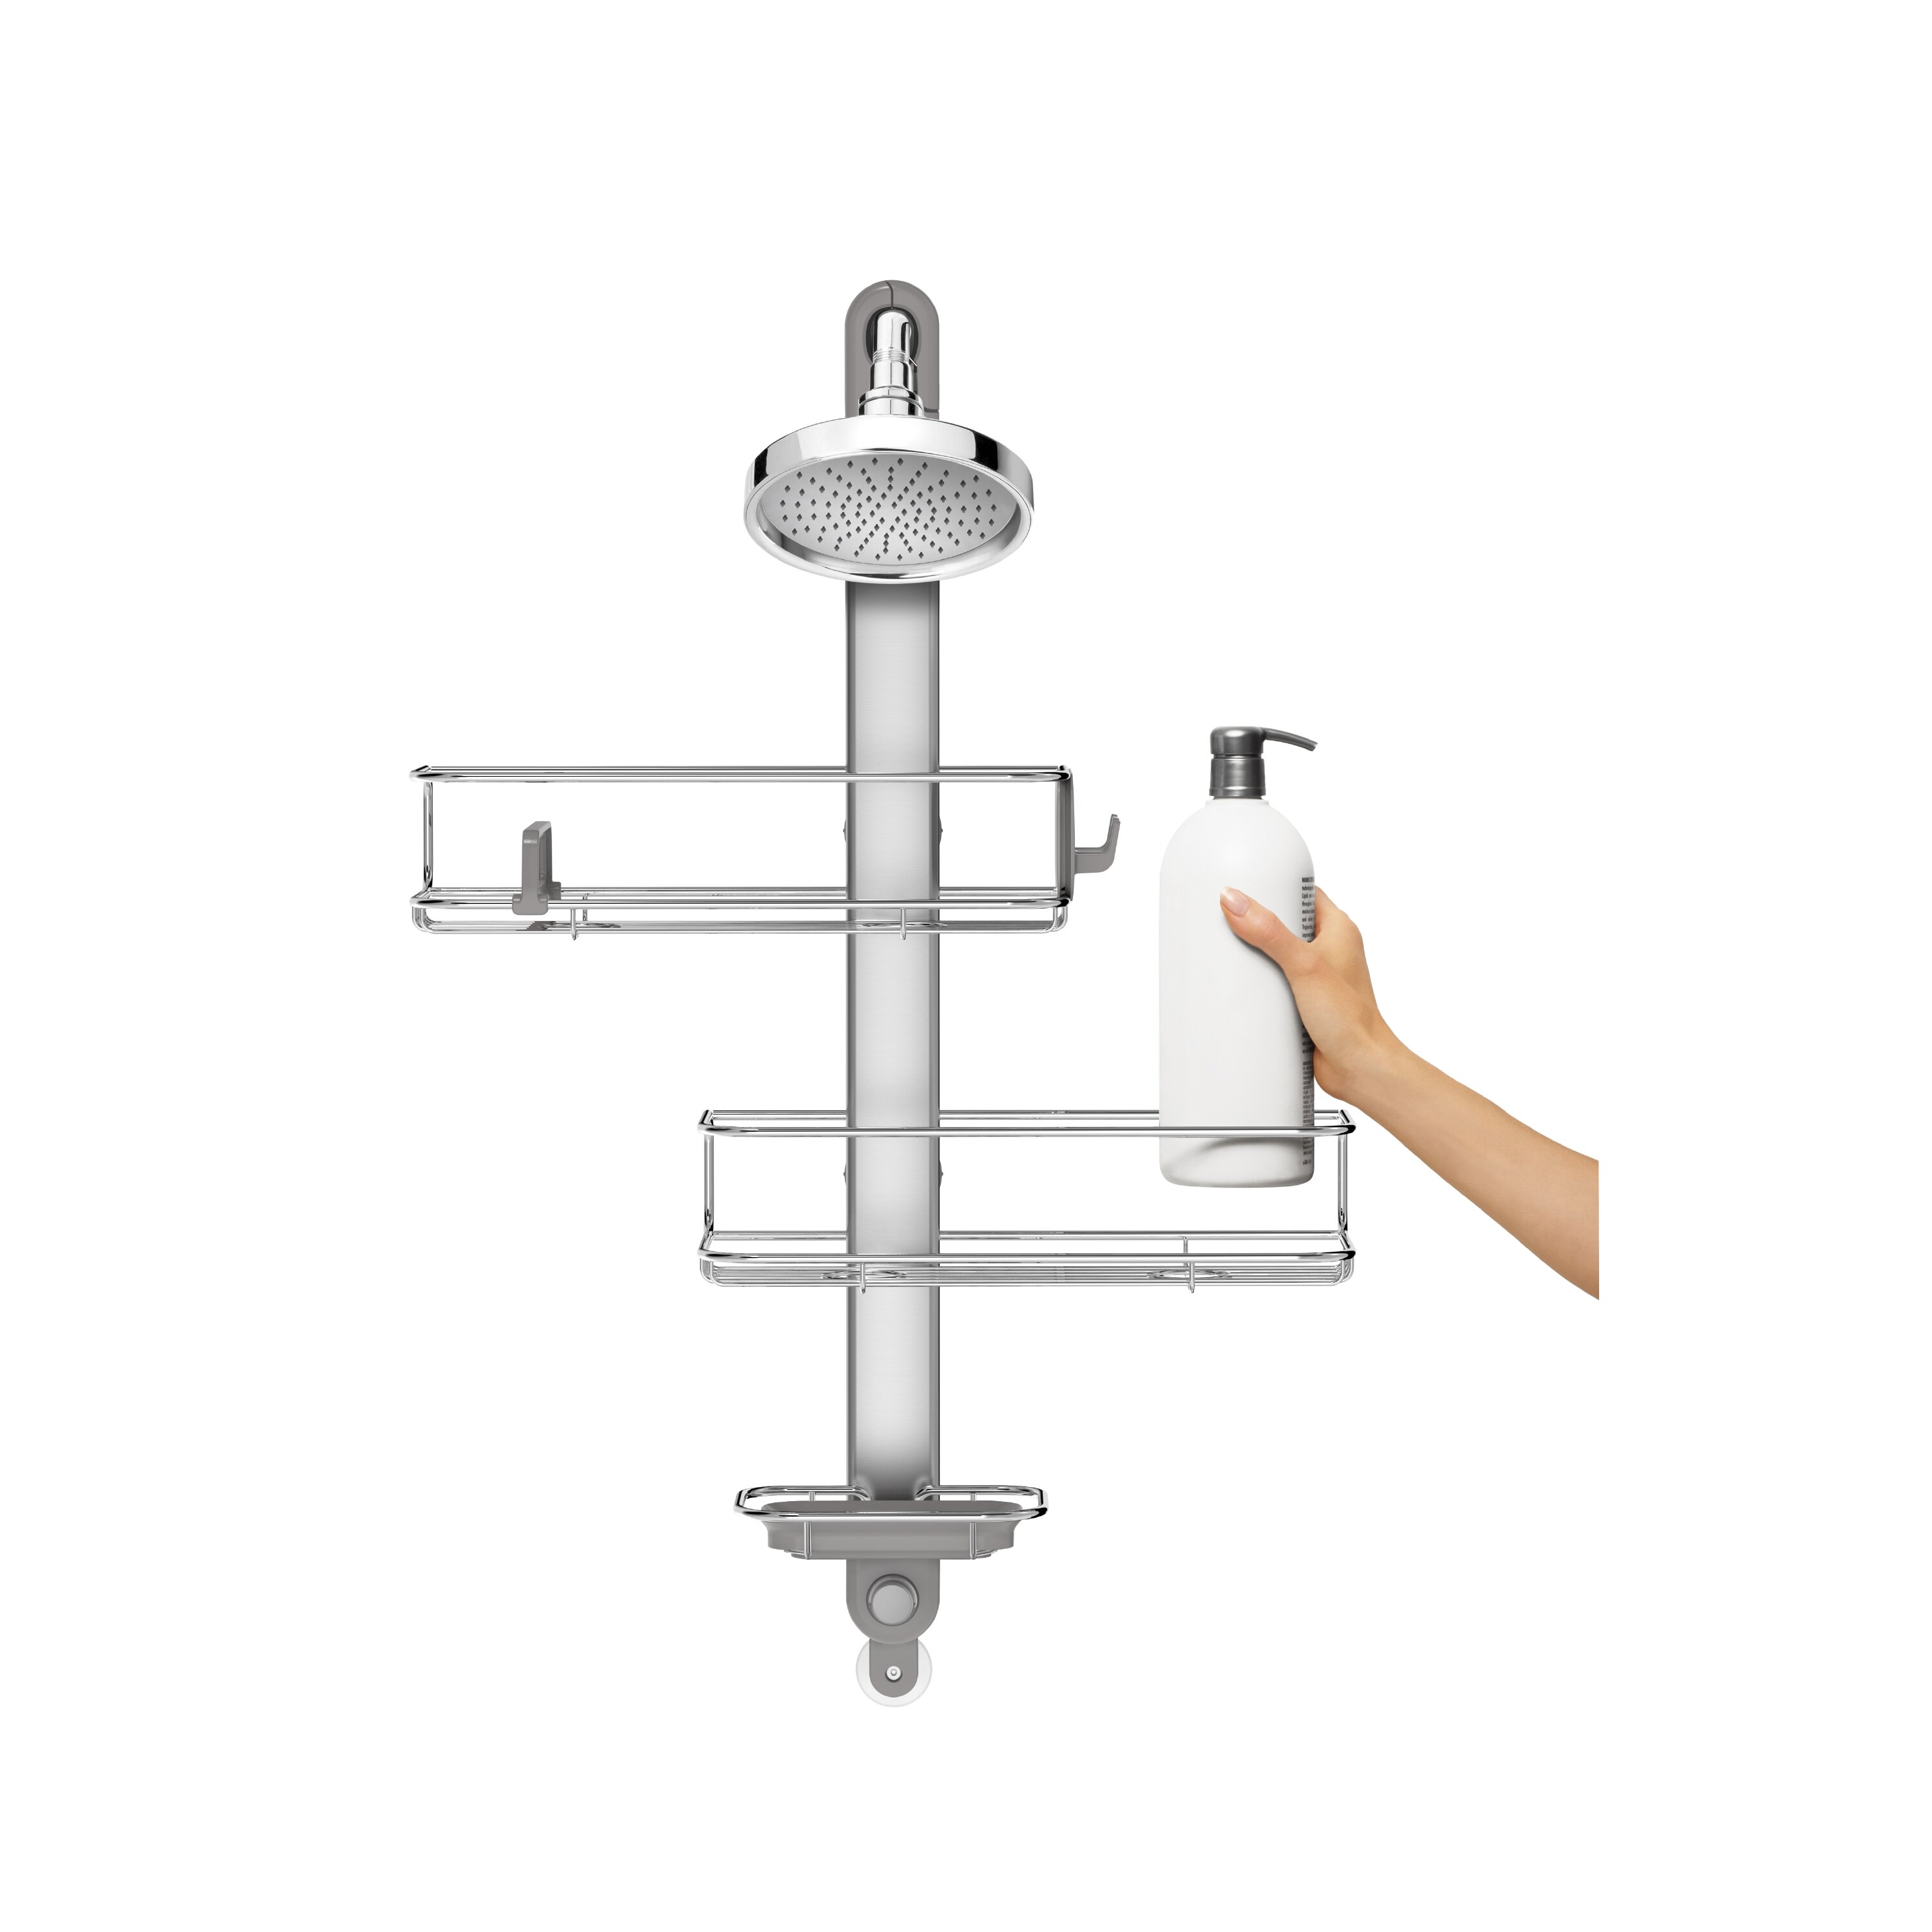 simplehuman Adjustable Shower Caddy in Stainless Steel & Anodized Simplehuman Stainless Steel Xl Adjustable Shower Caddy